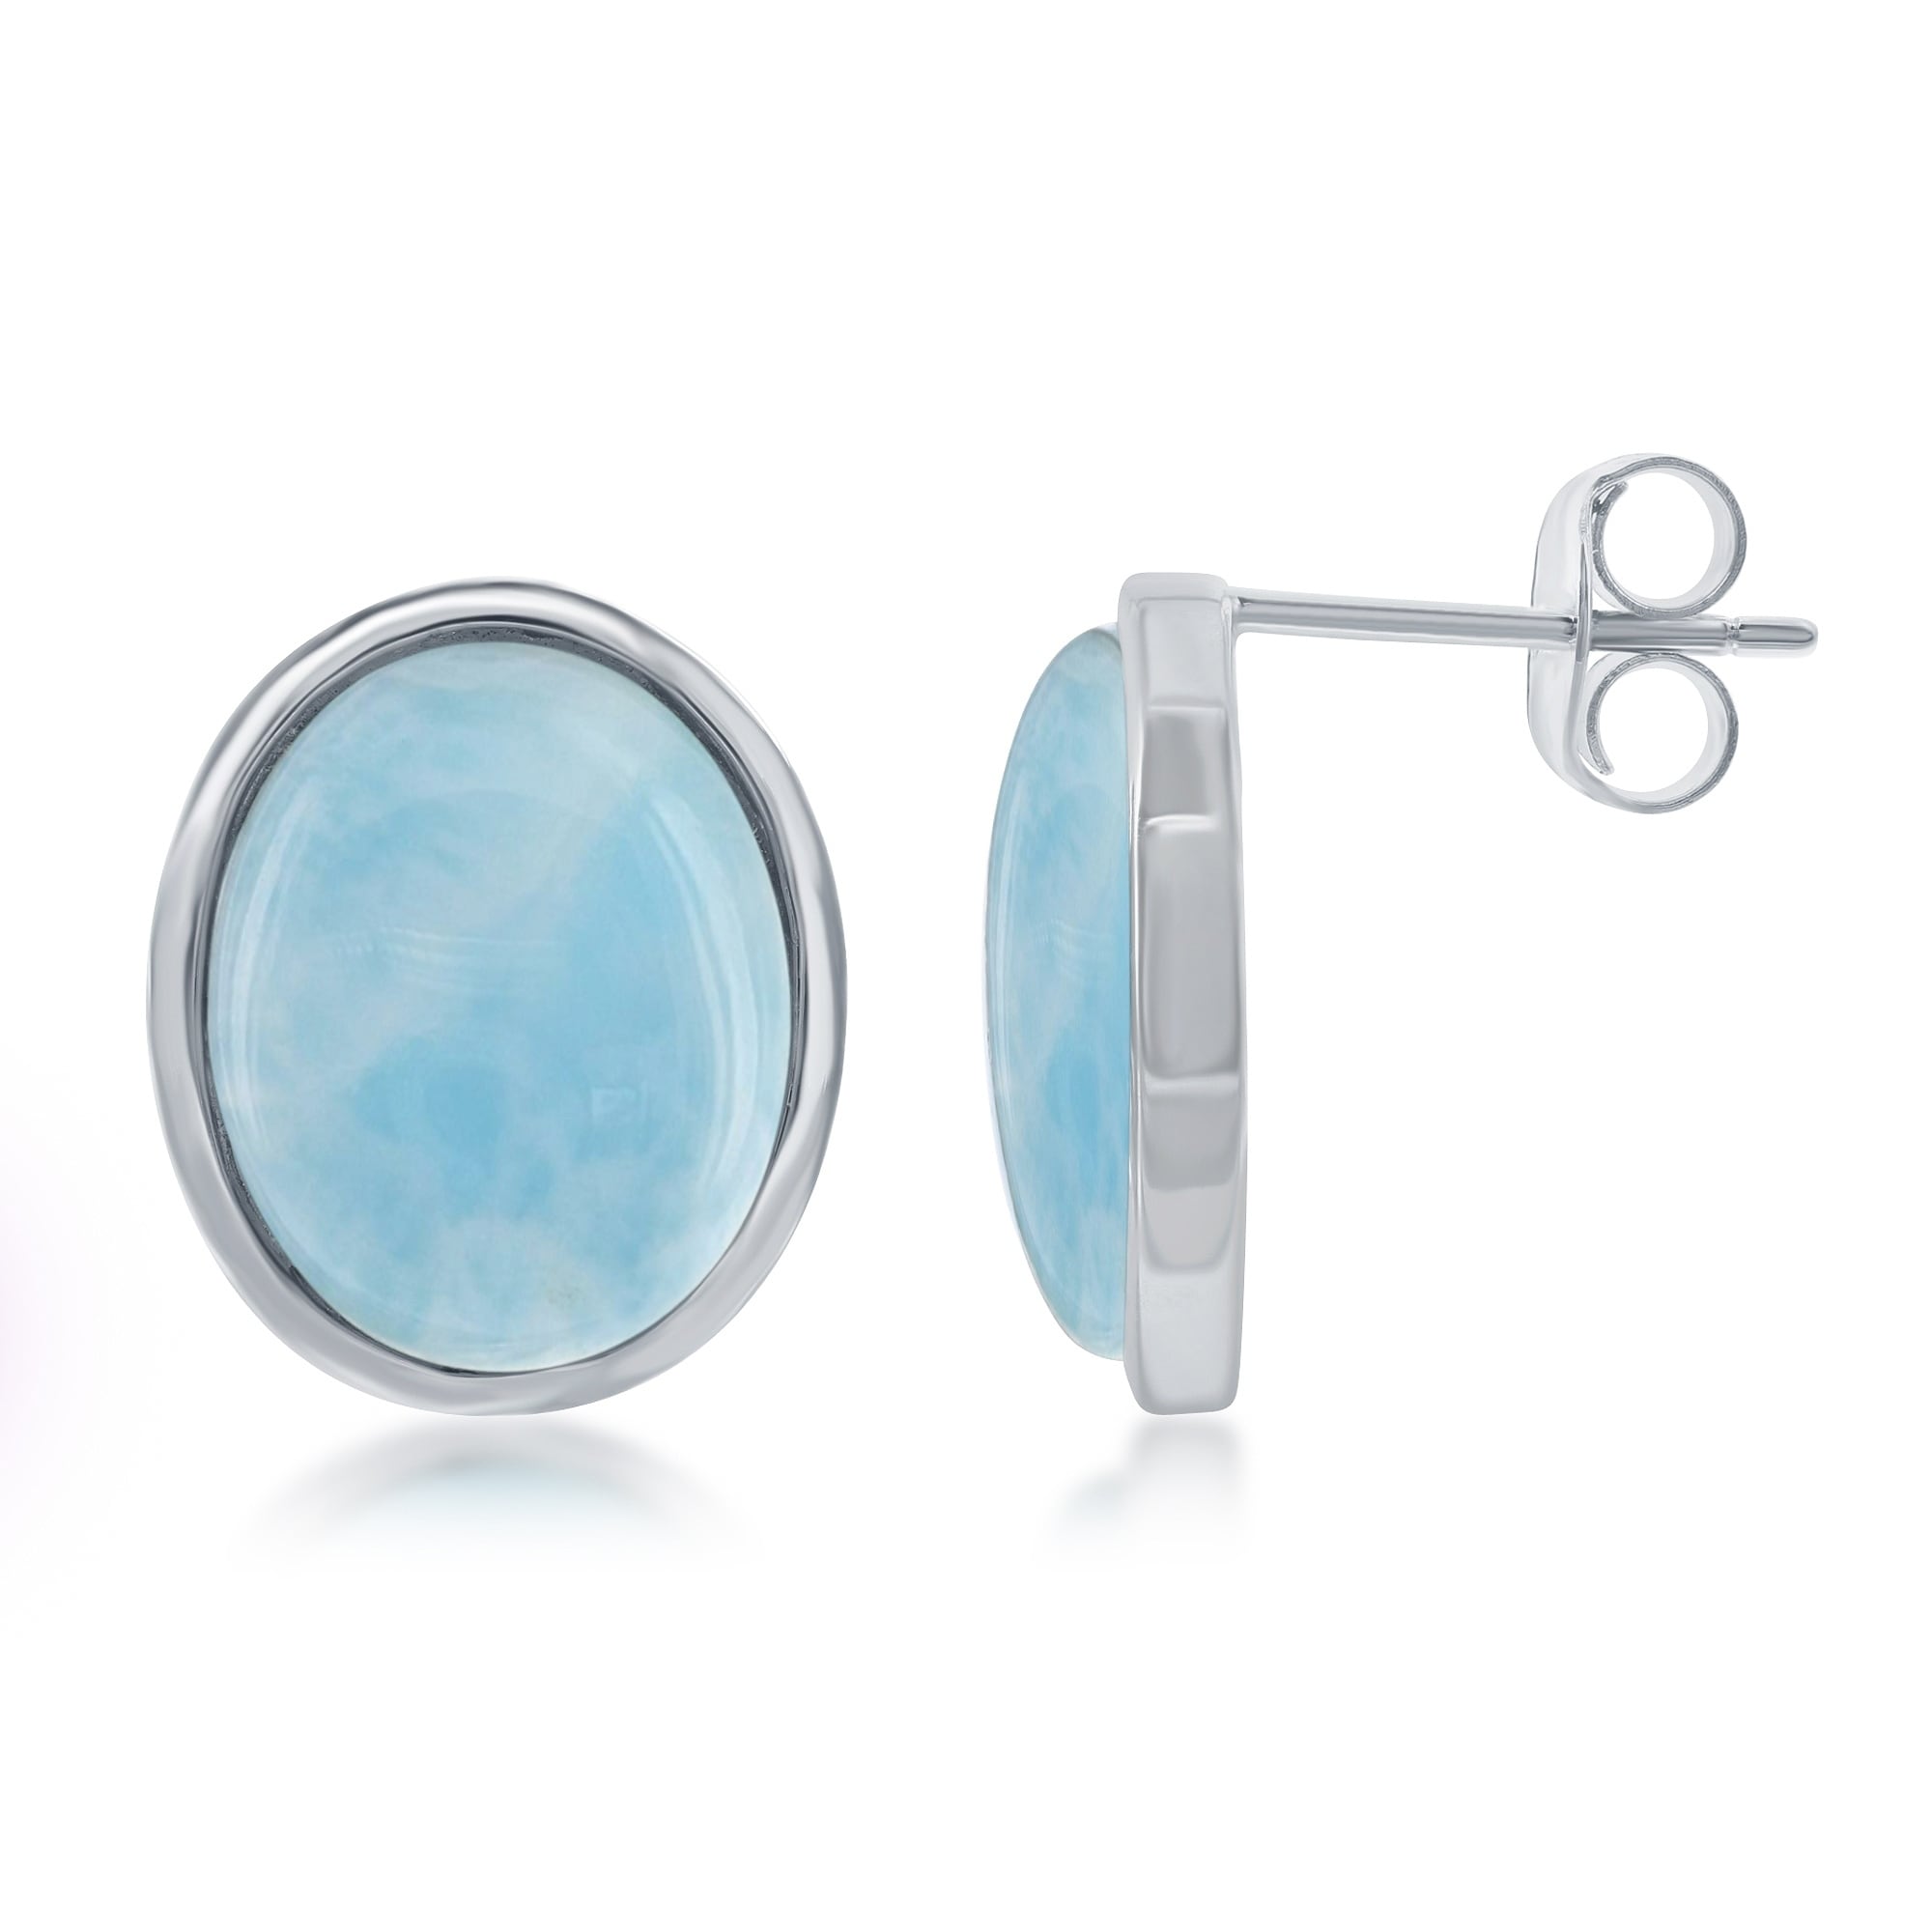 Necklace .925 Sterling Silver Genuine Larimar Set Ring Promotion Earrings